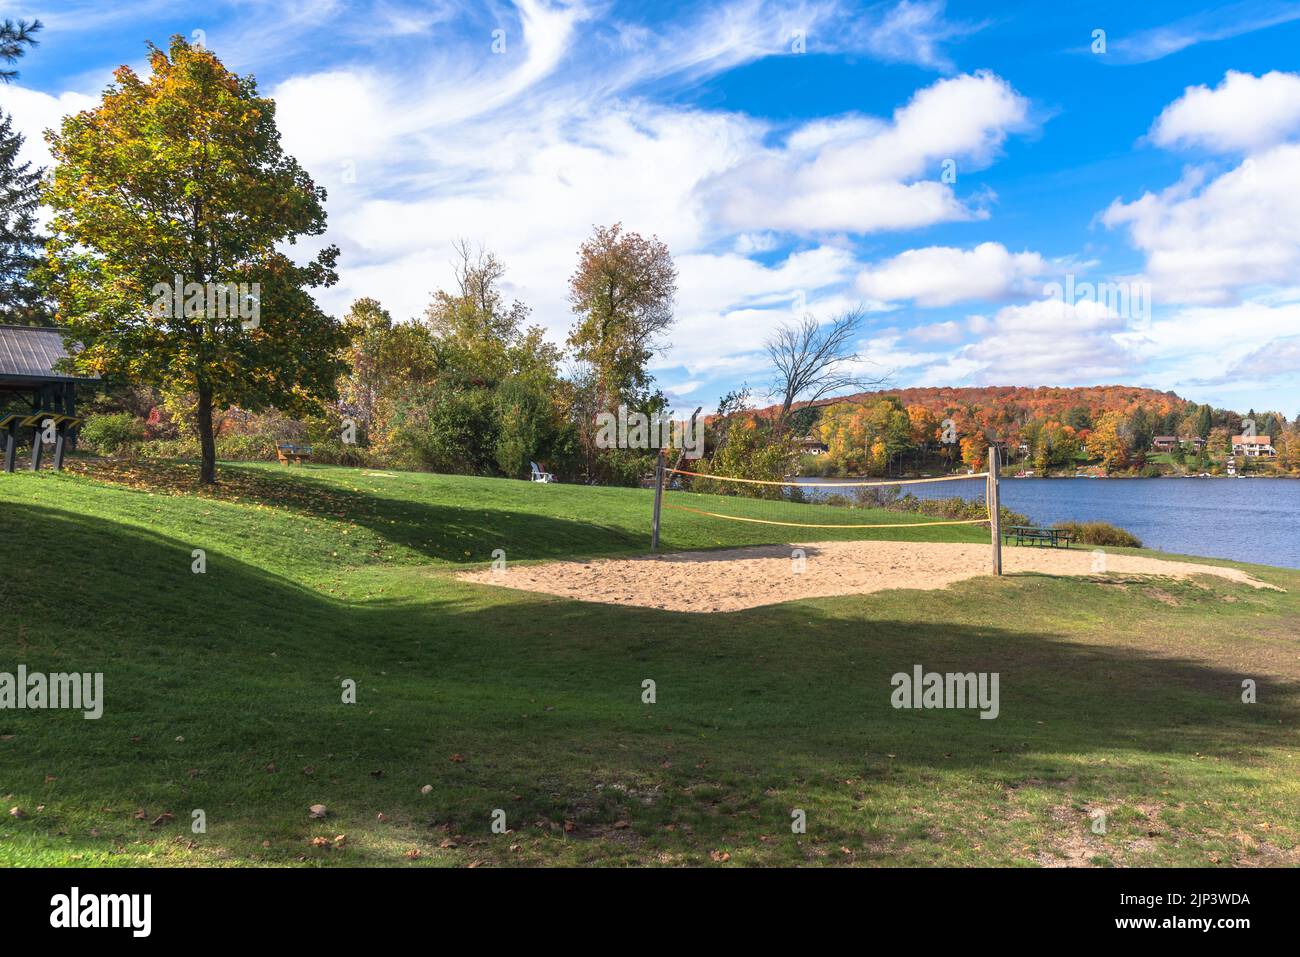 Sand volleyball court in a deserted lakeside park on a clear autumn day Stock Photo